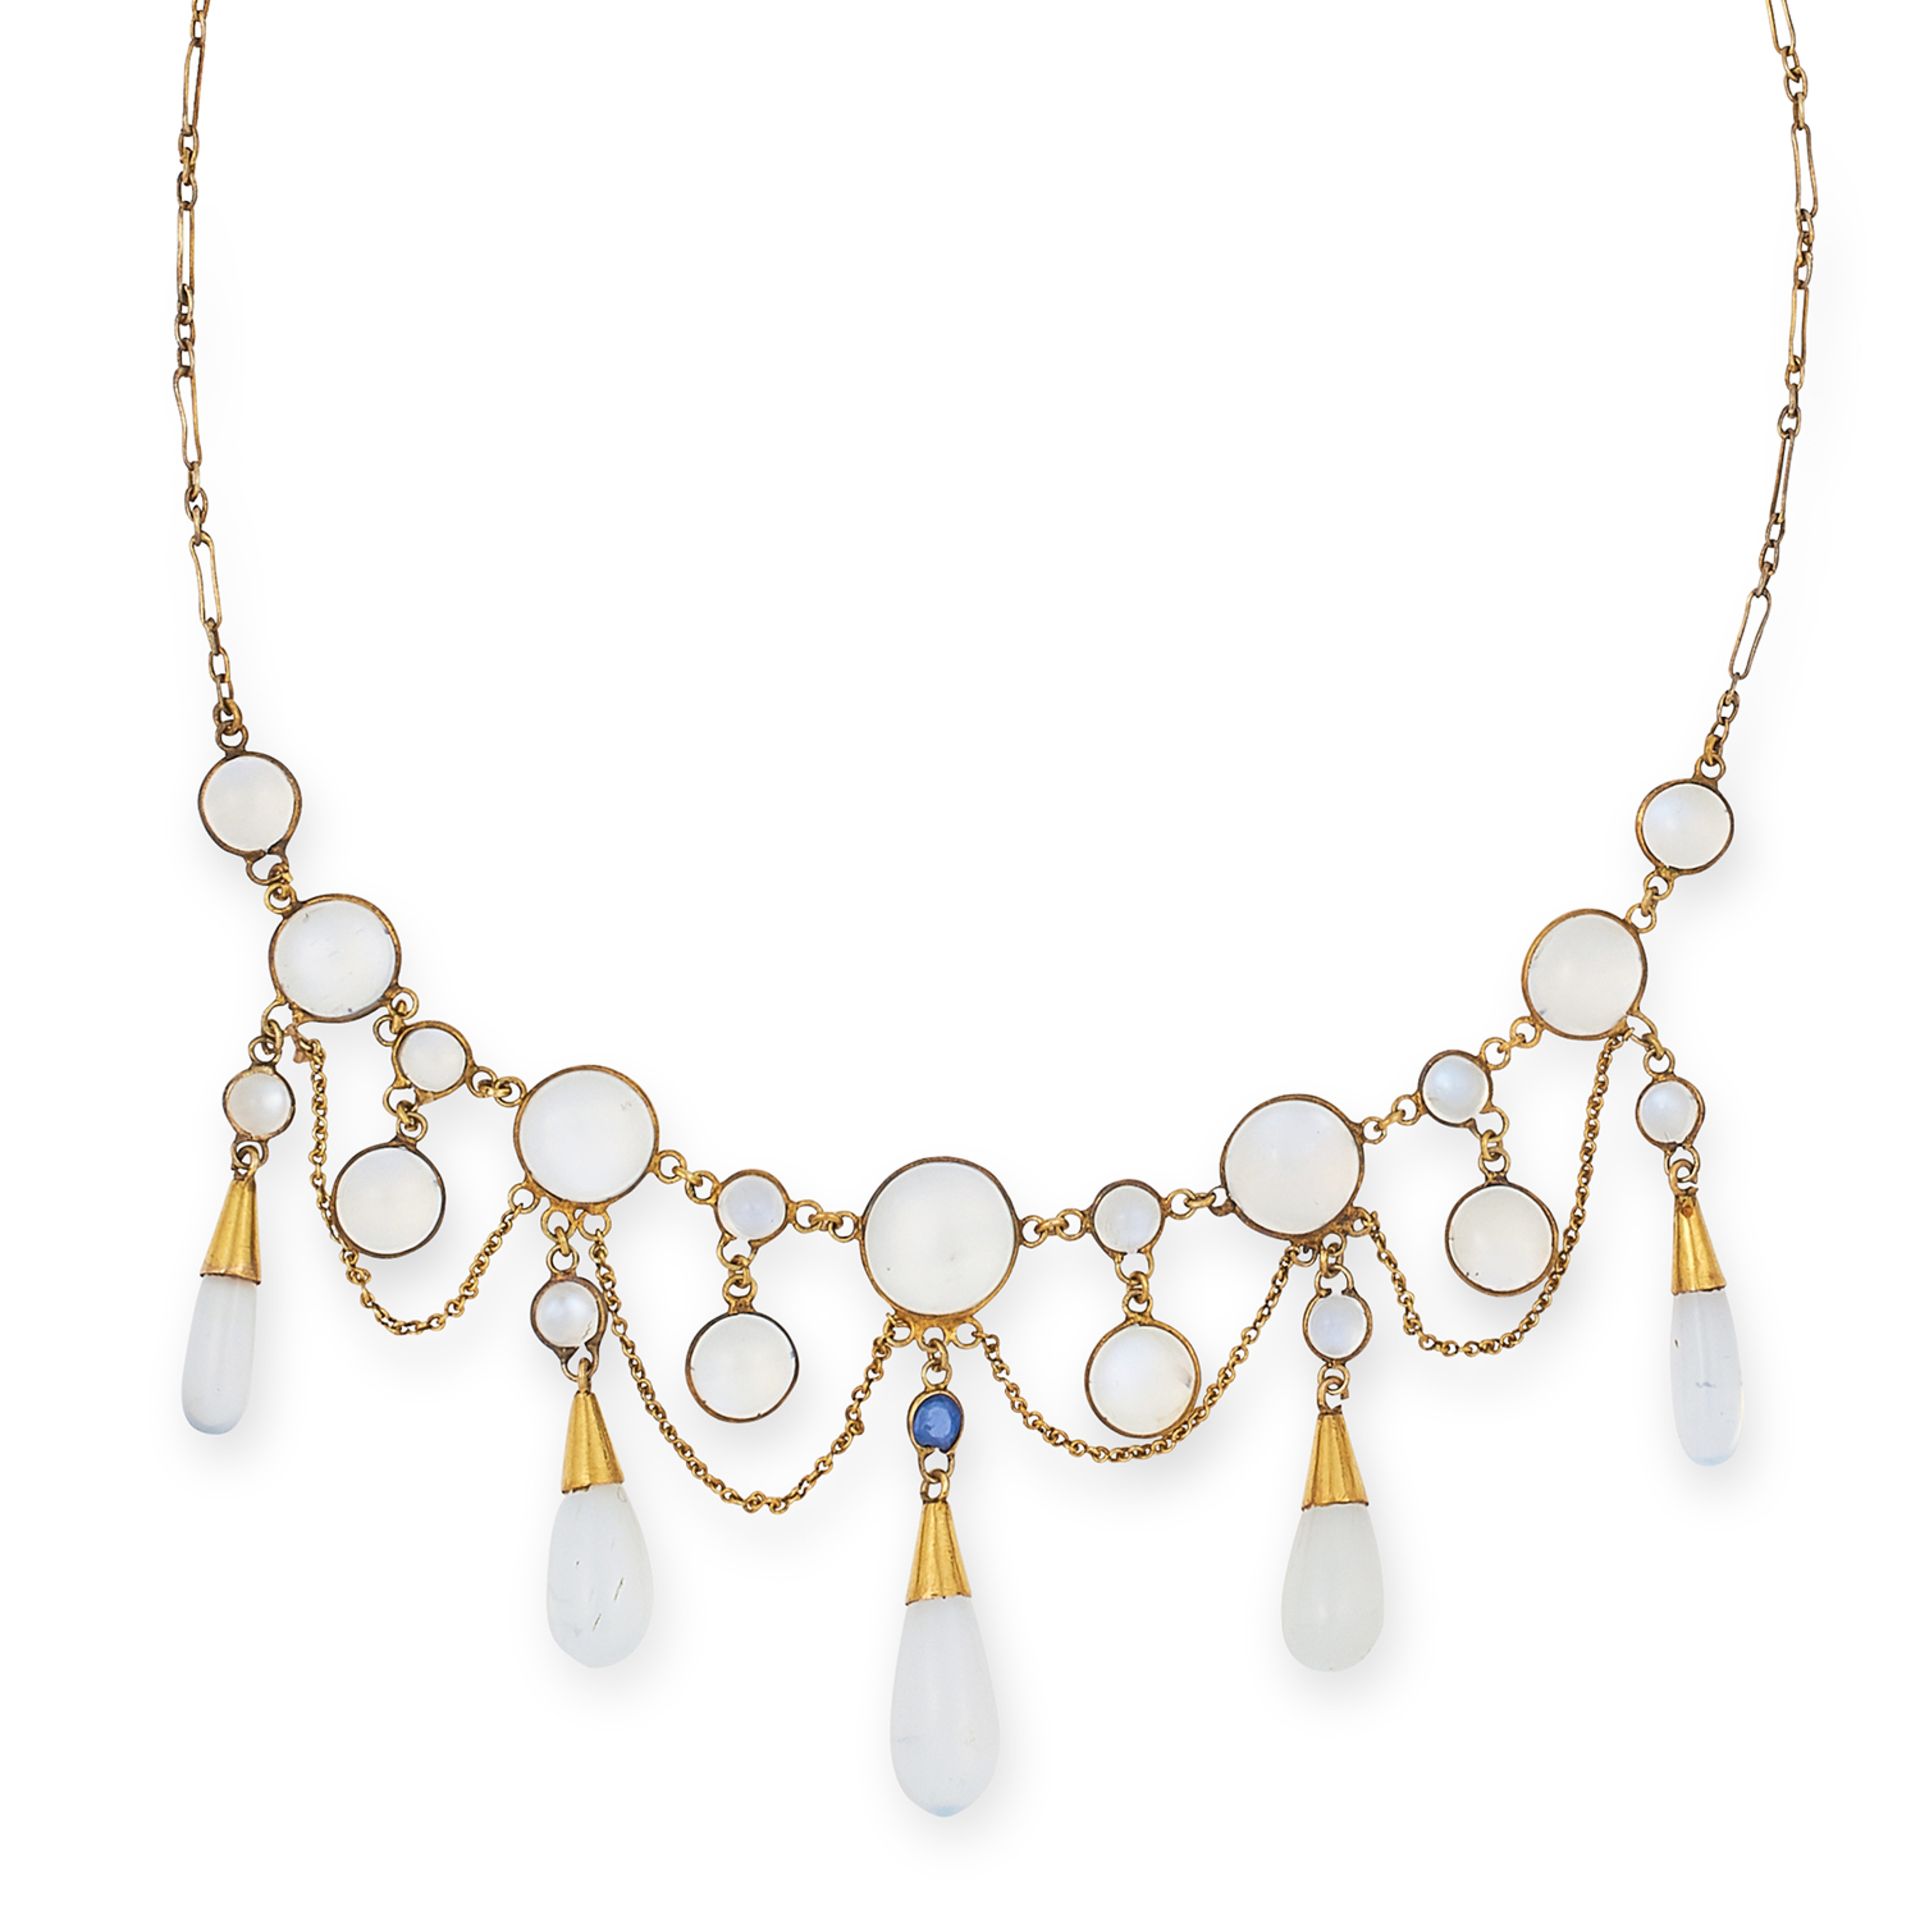 ANTIQUE MOONSTONE AND SAPPHIRE NECKLACE set with a round cut sapphire, cabochon moonstone and